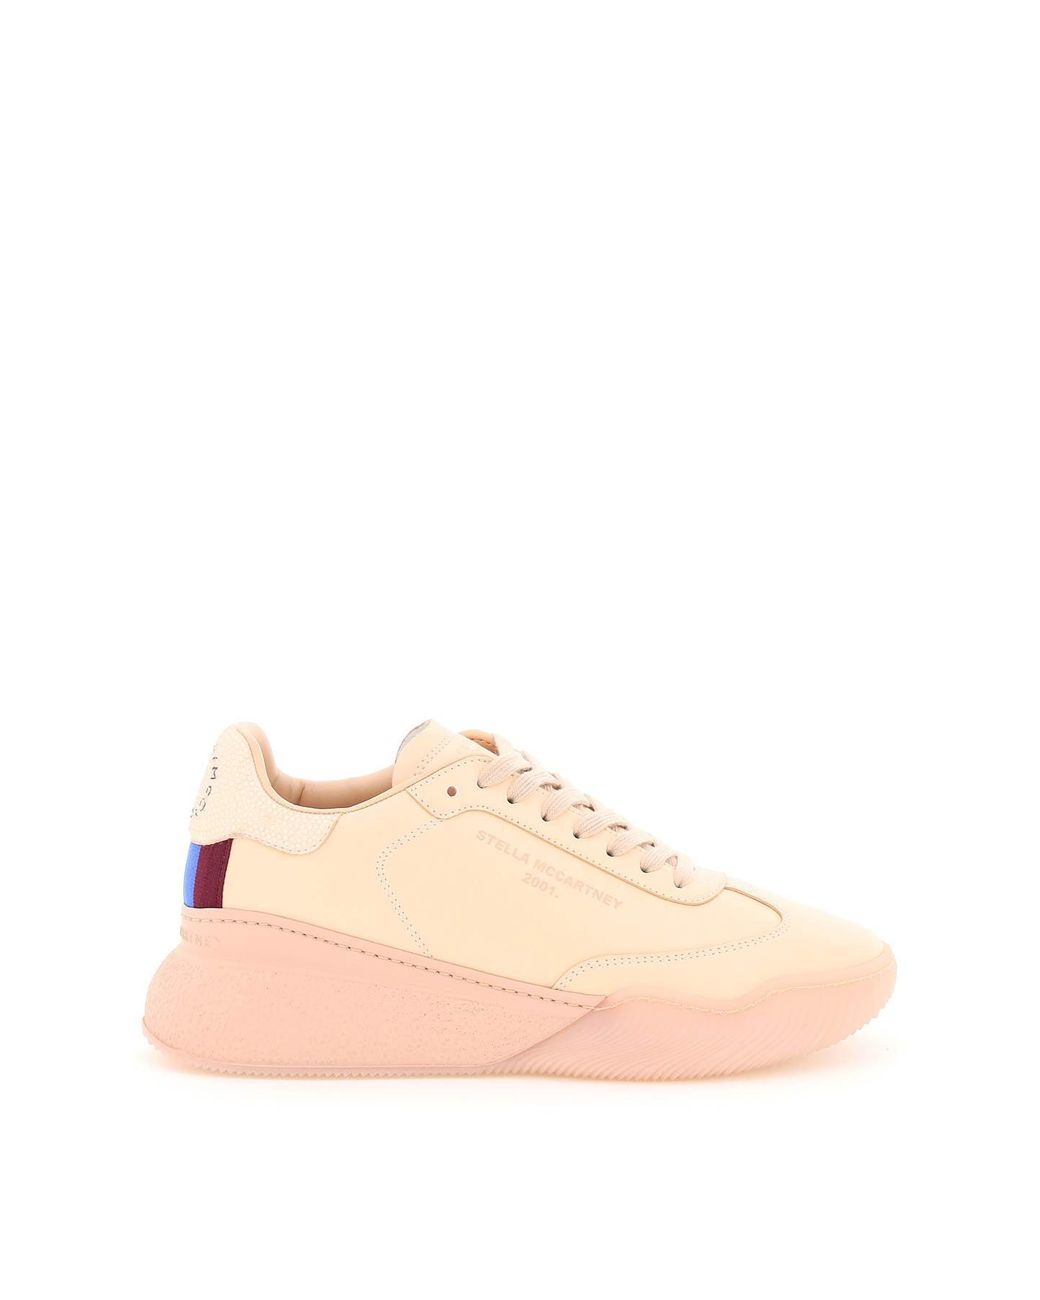 Stella McCartney Faux Leather Trainer Sneakers in Pink | Lyst